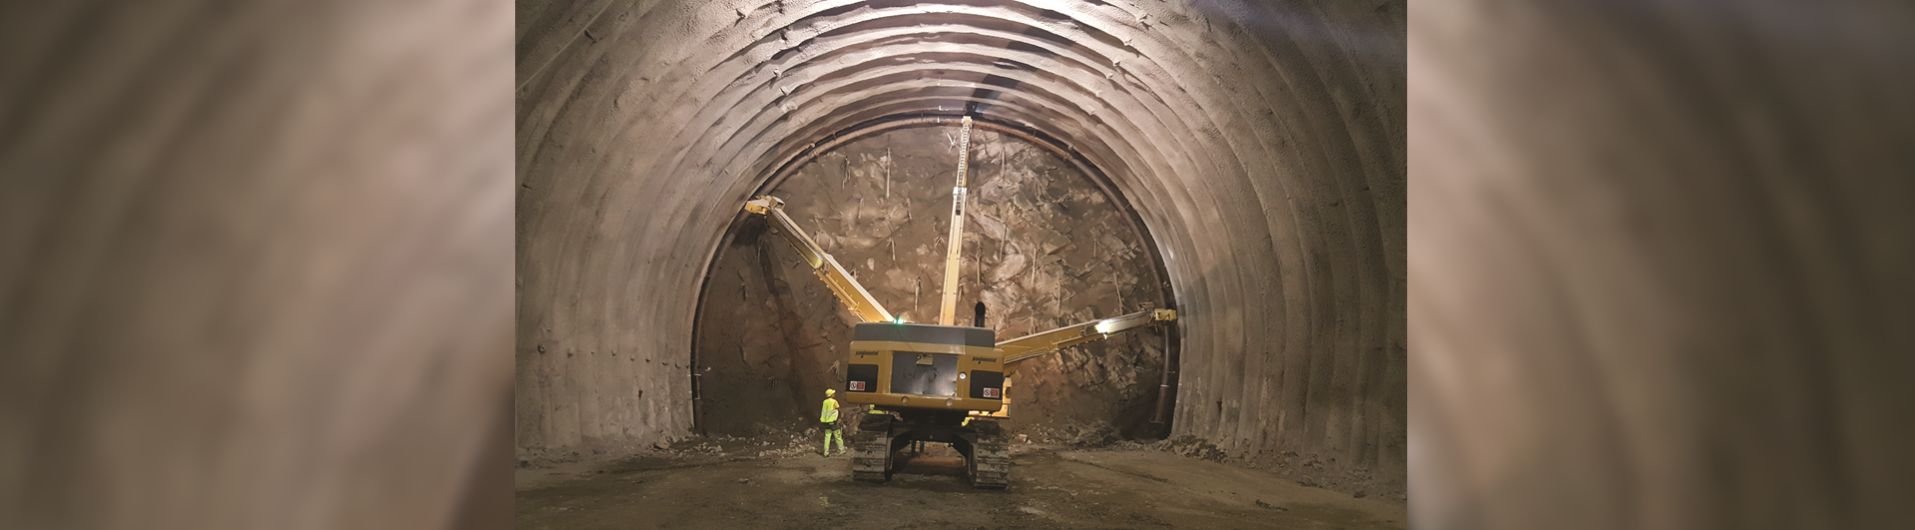 Maccaferri innovates tunnel construction with automated ribs.